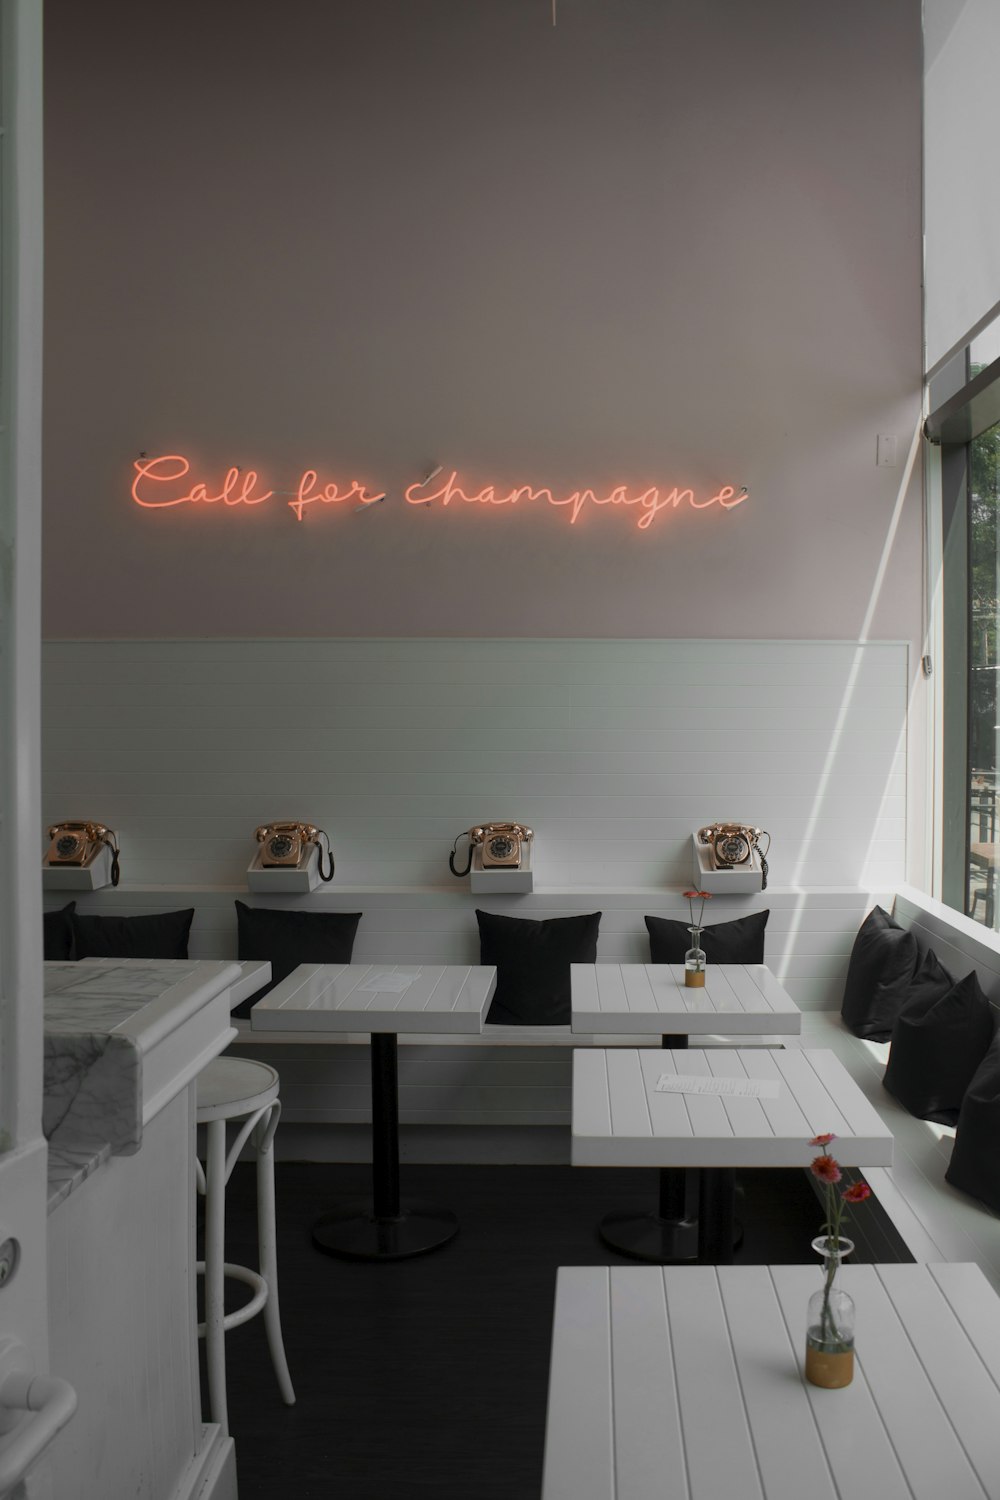 cal for champagne signage